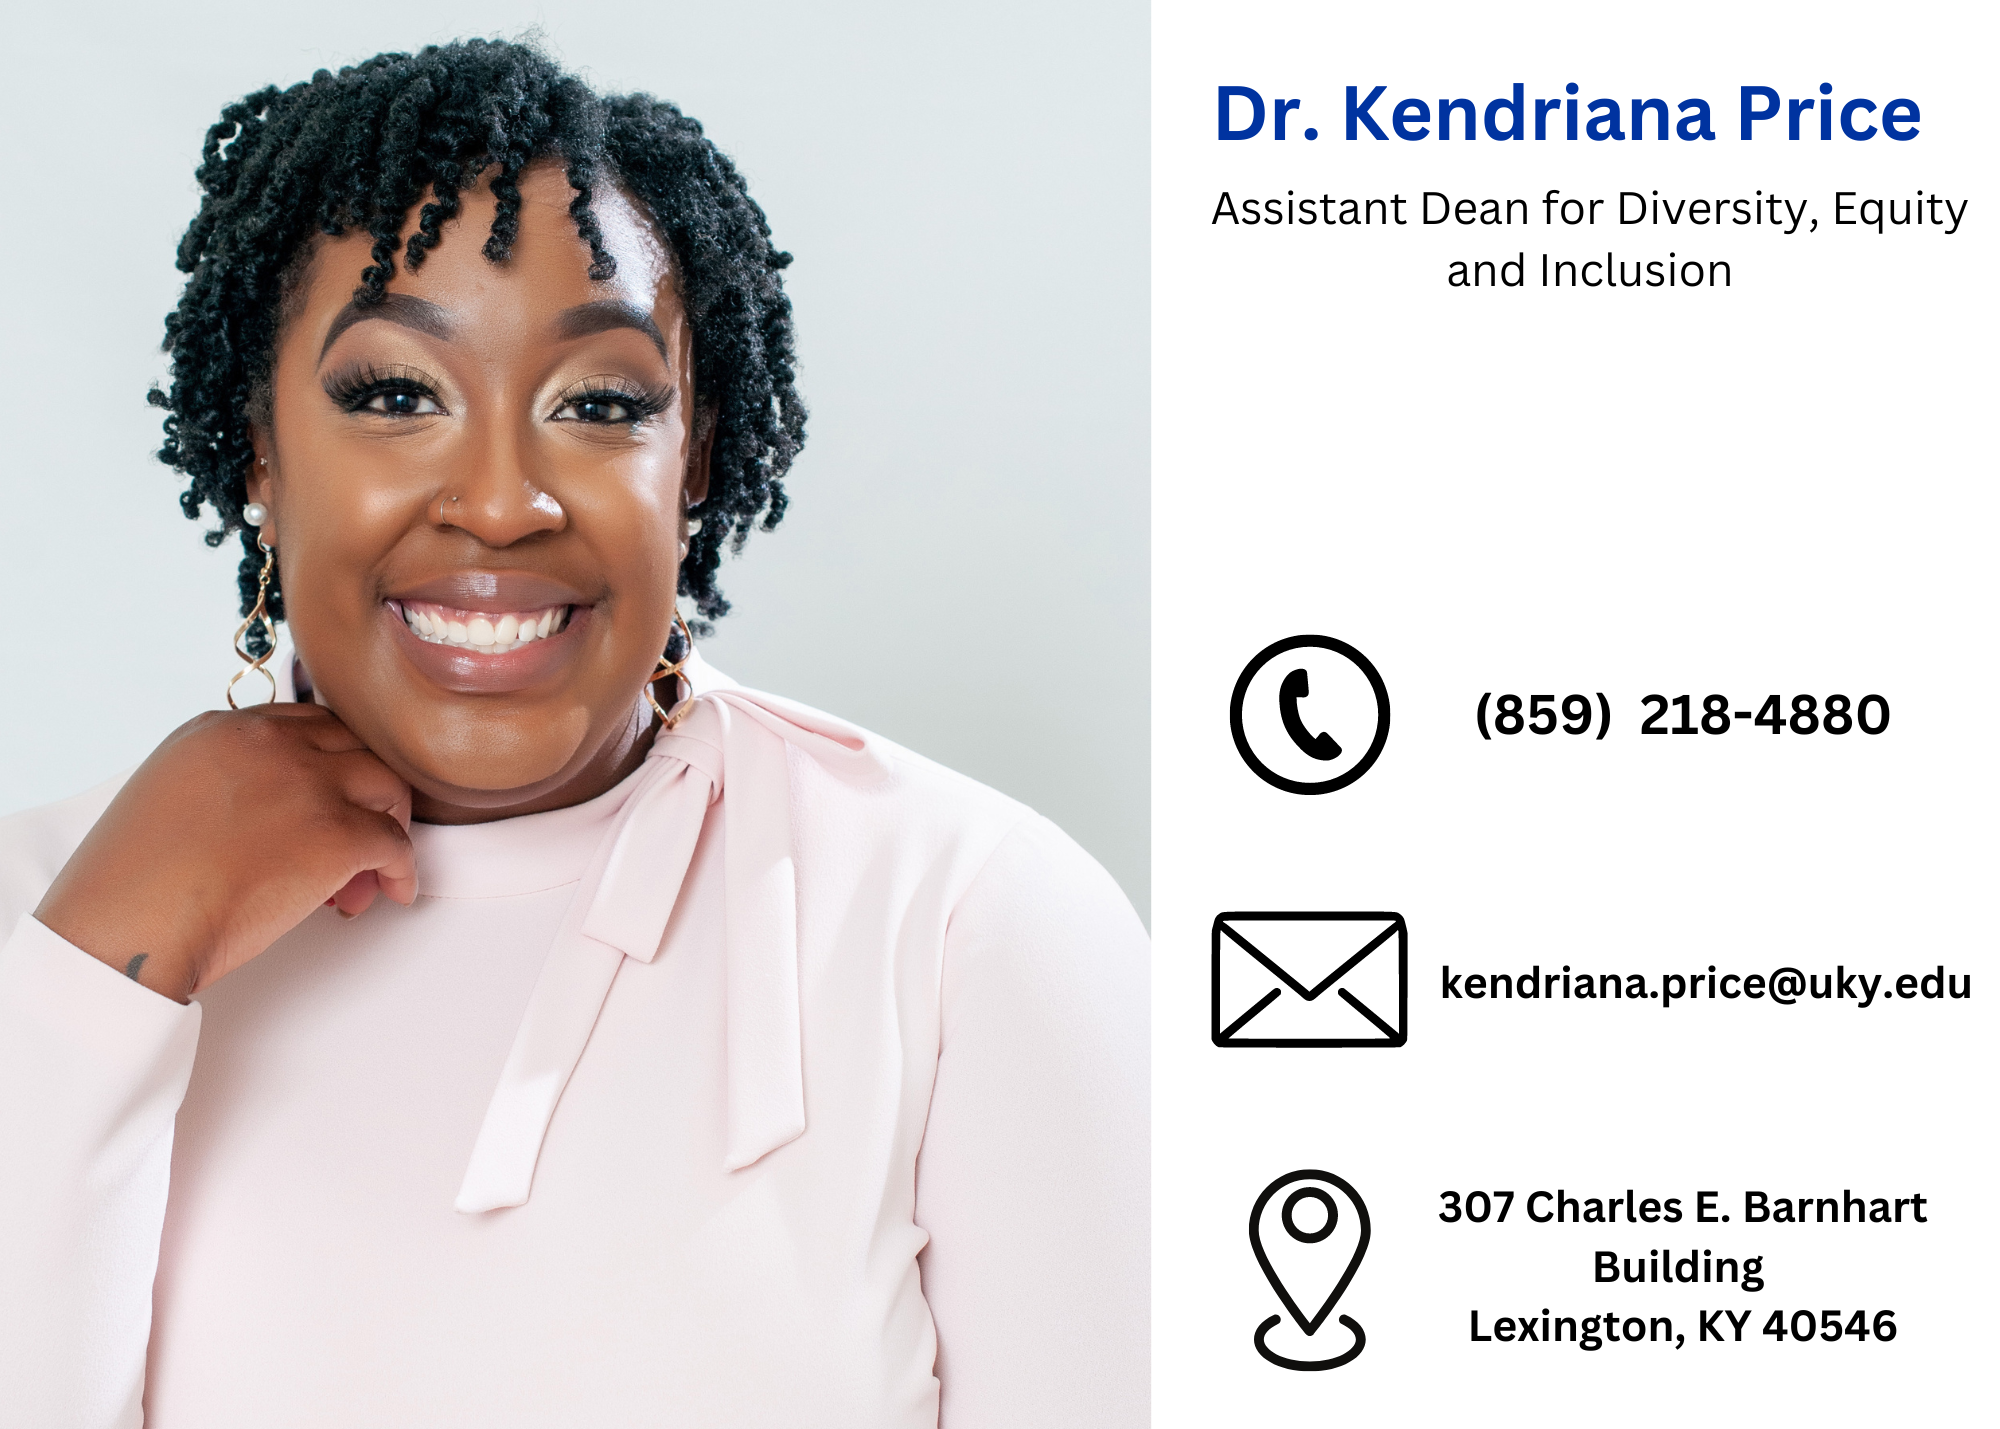 meet the team - Dr. Kendriana Price - Assistant Dean 